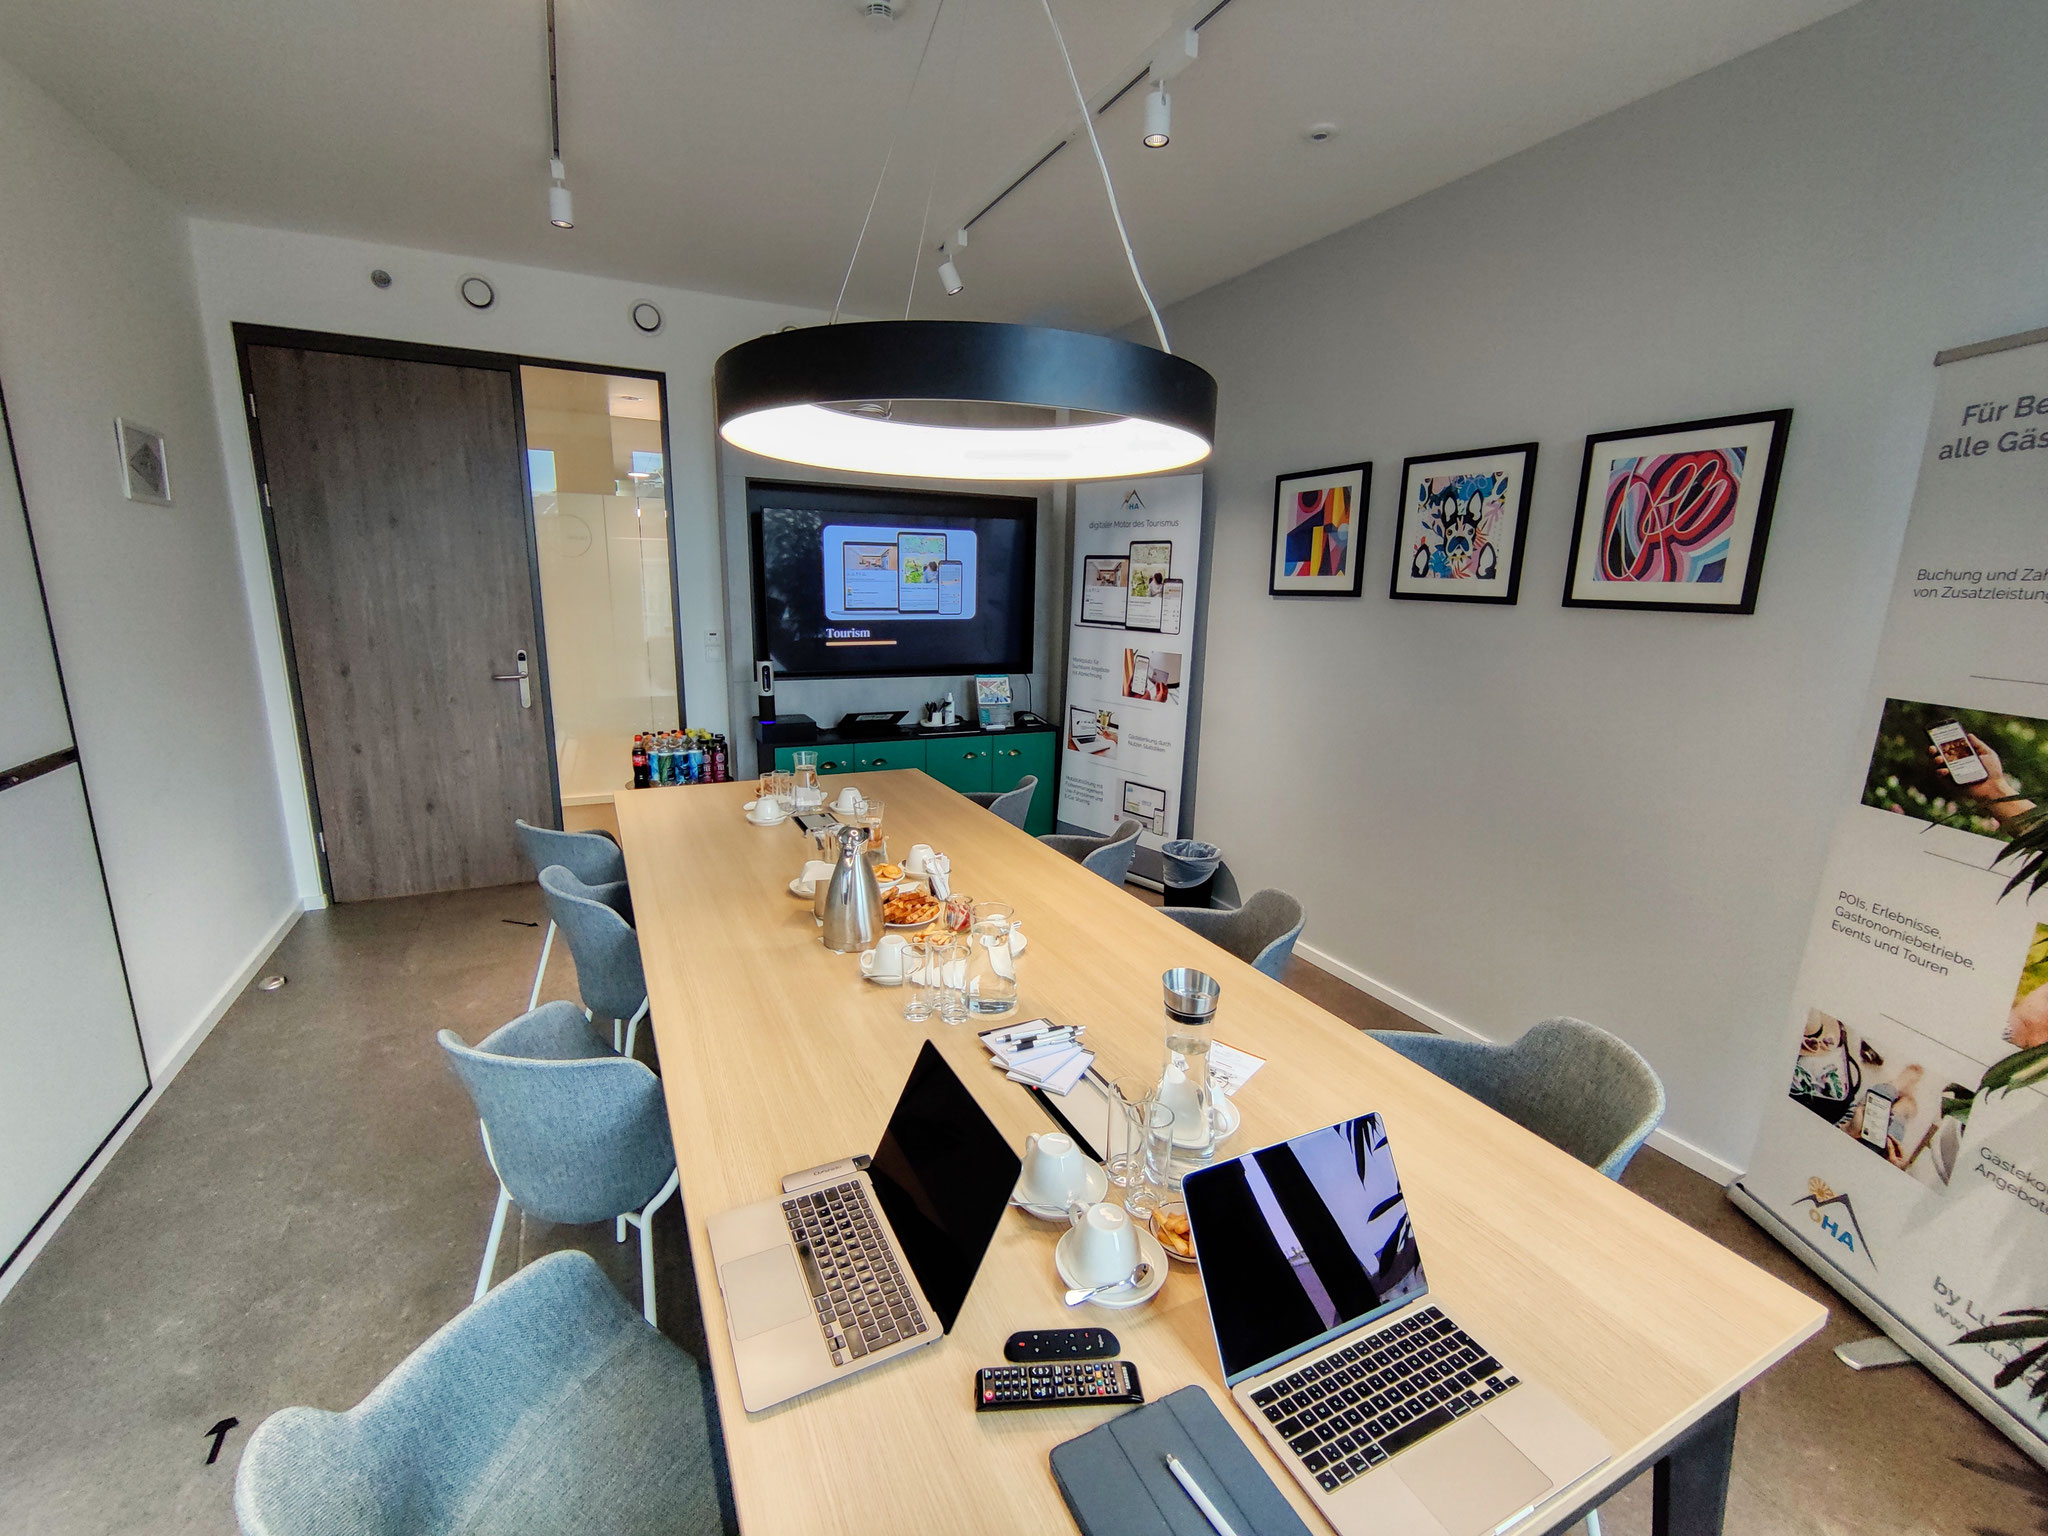 We are looking forward to exciting discussions with you in our meeting rooms